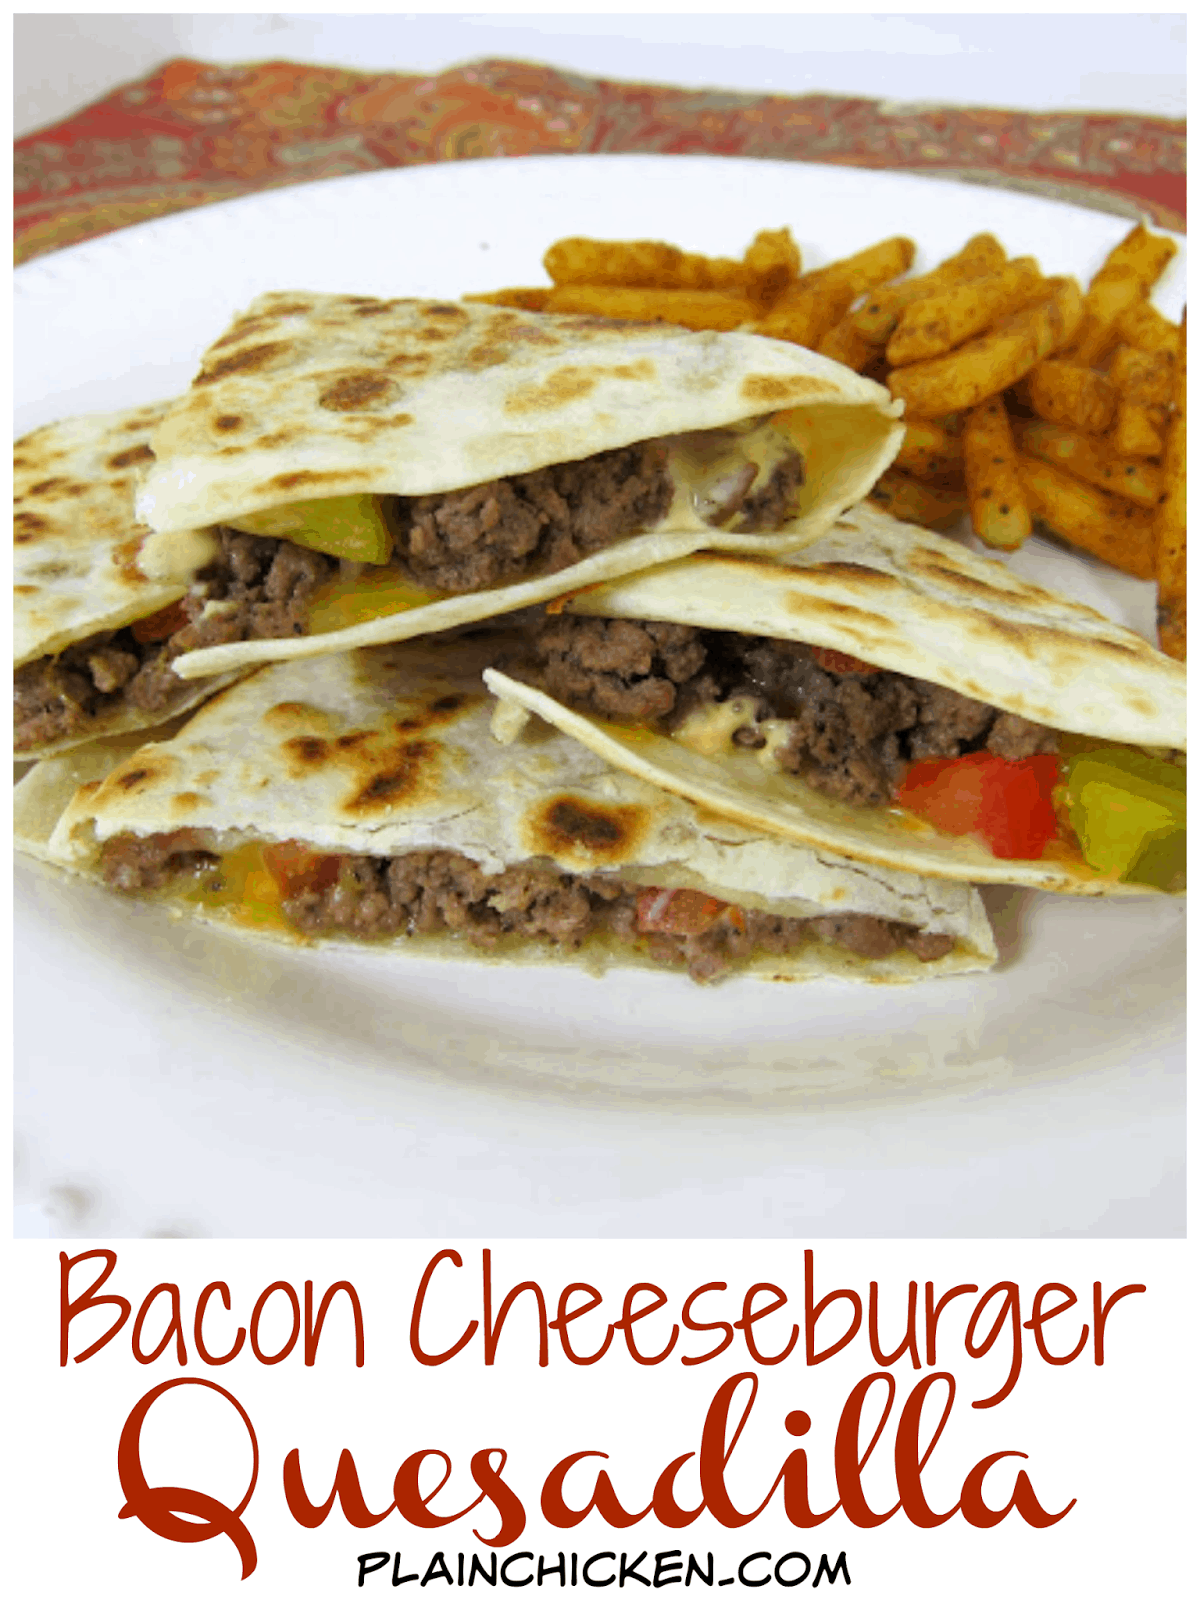 Bacon Cheeseburger Quesadillas - all the flavors of a bacon cheeseburger in a quesadilla! Can use ground turkey, turkey bacon and wheat tortillas for a healthy weekday meal.